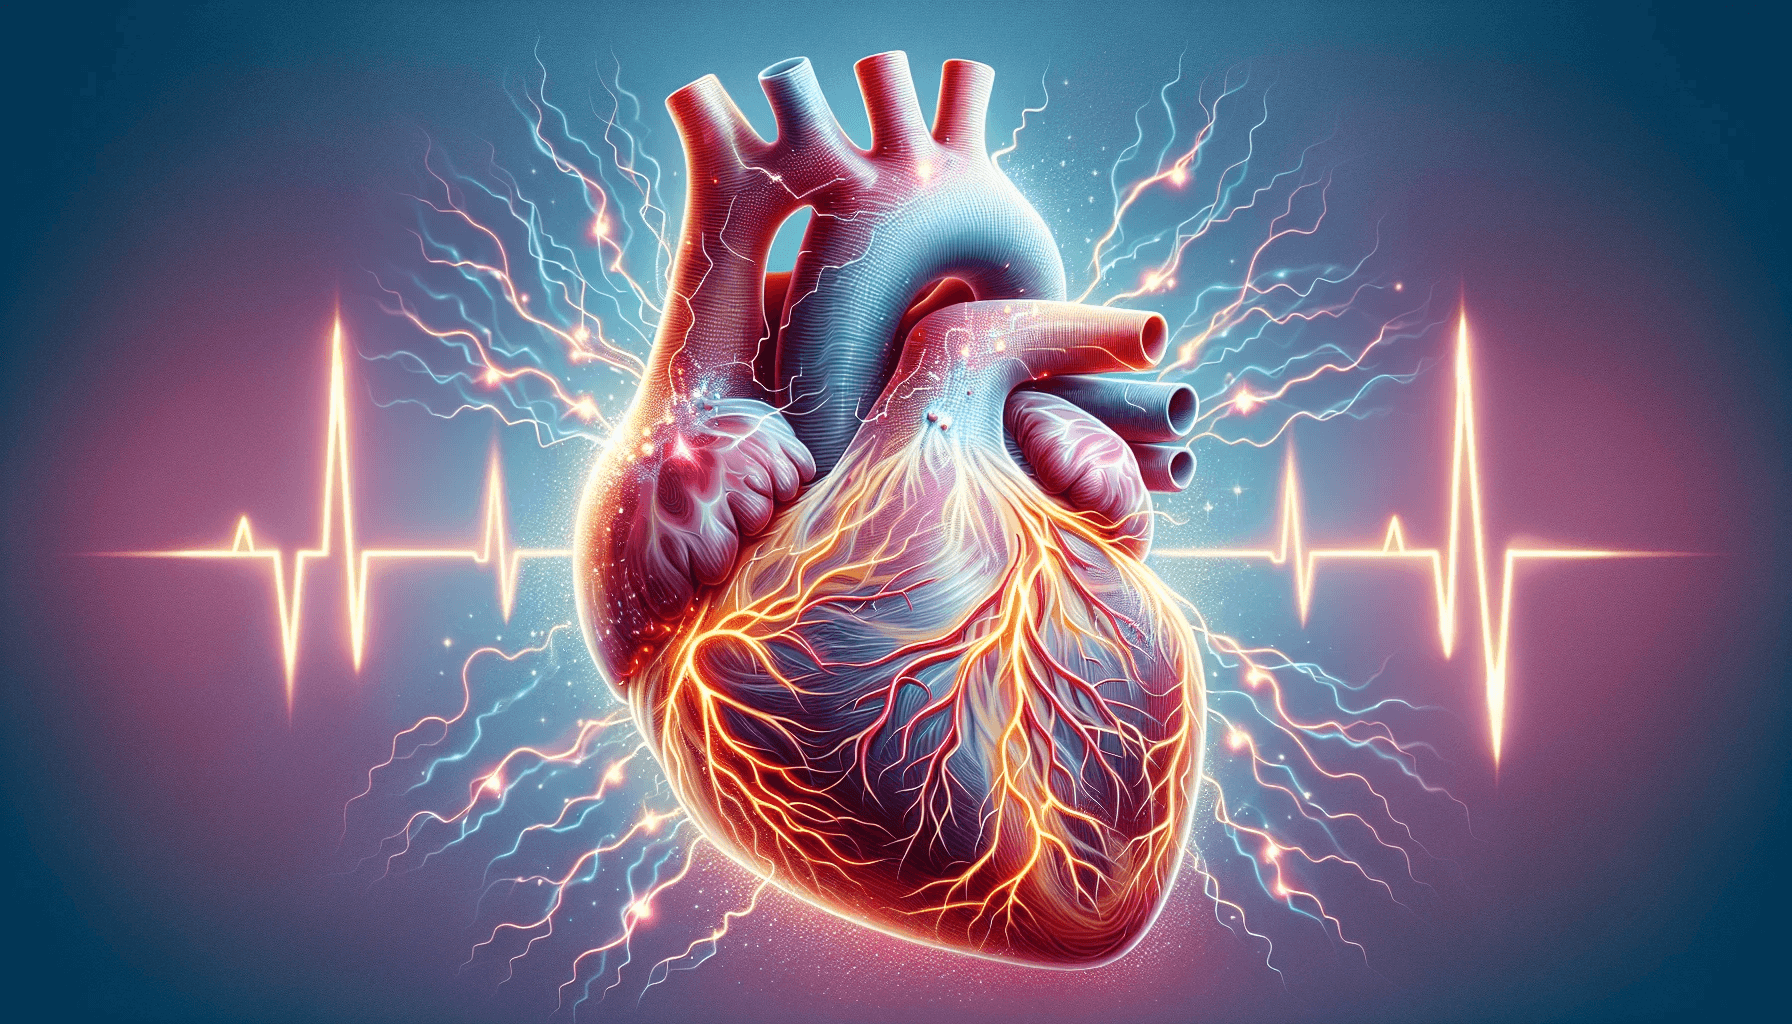 Illustration of electrical signals in the heart